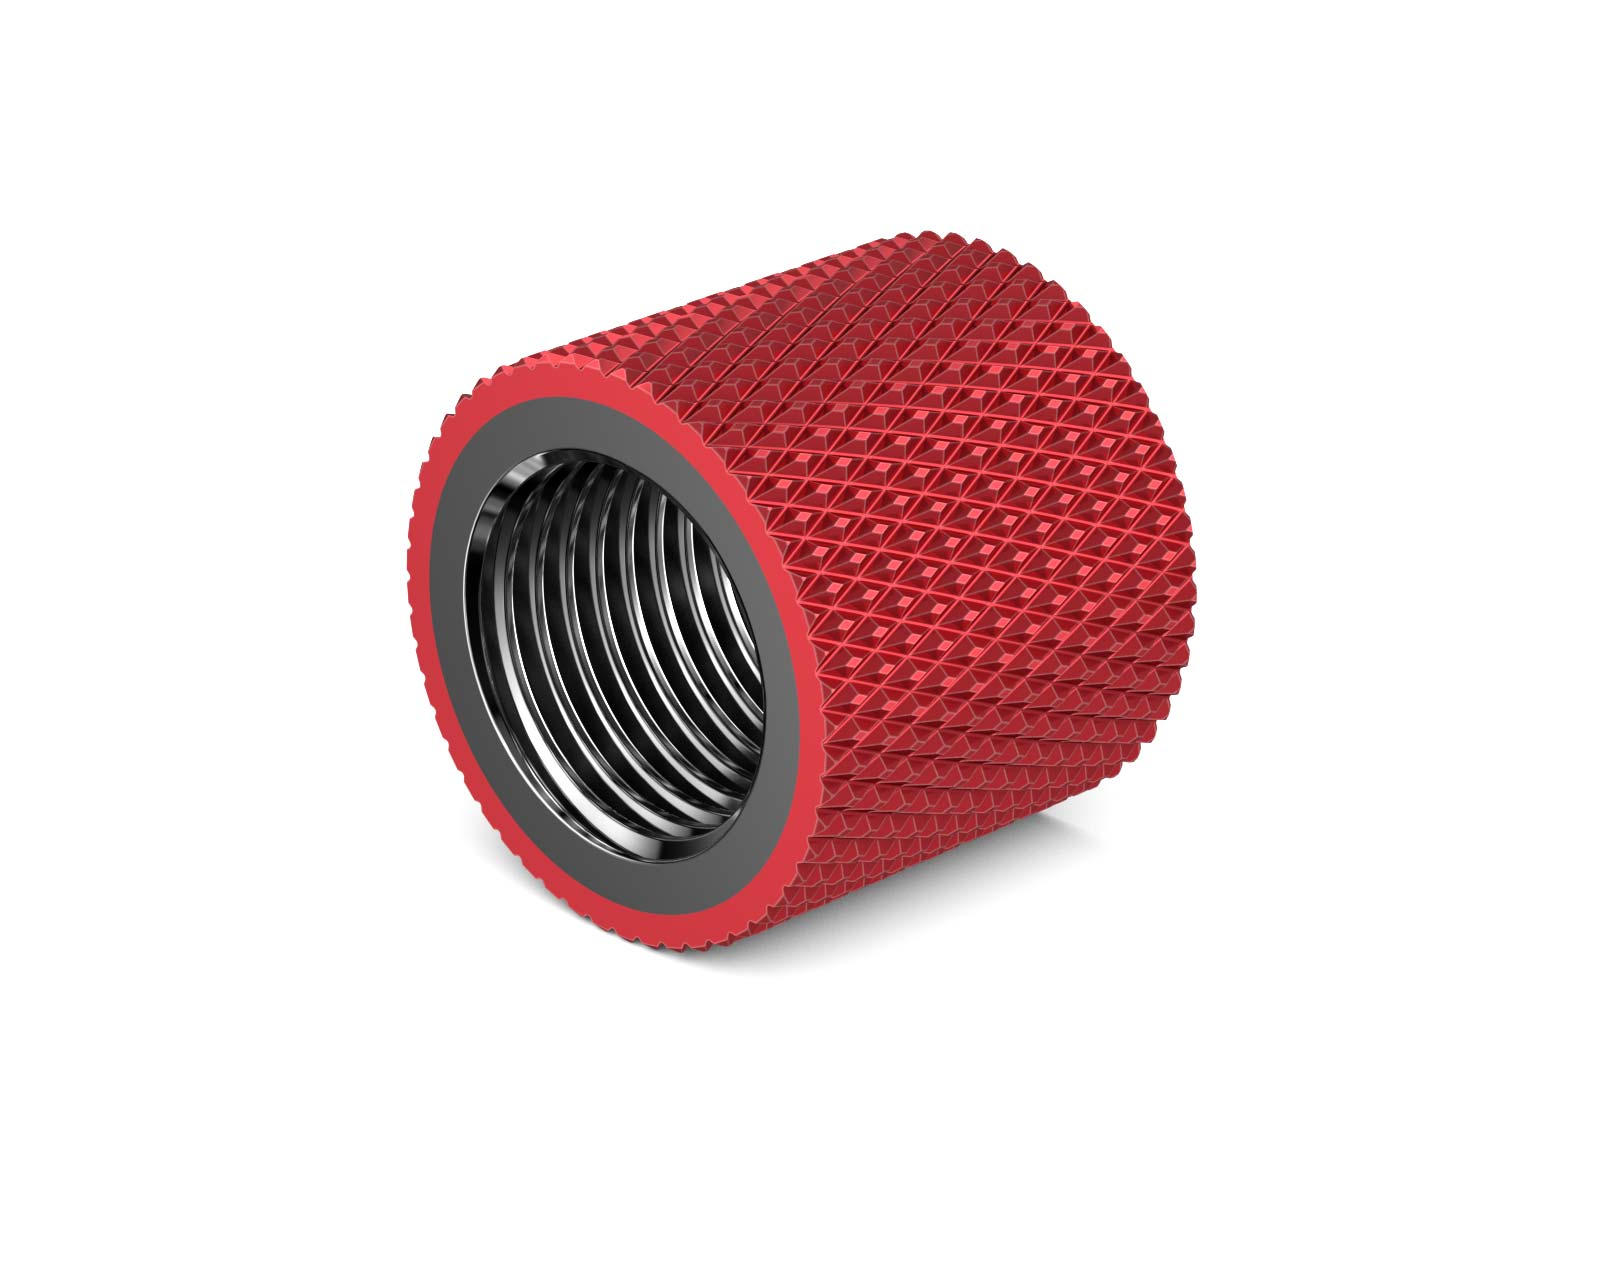 PrimoChill Dual Female G 1/4in. Straight SX Extension Coupler - PrimoChill - KEEPING IT COOL Candy Red